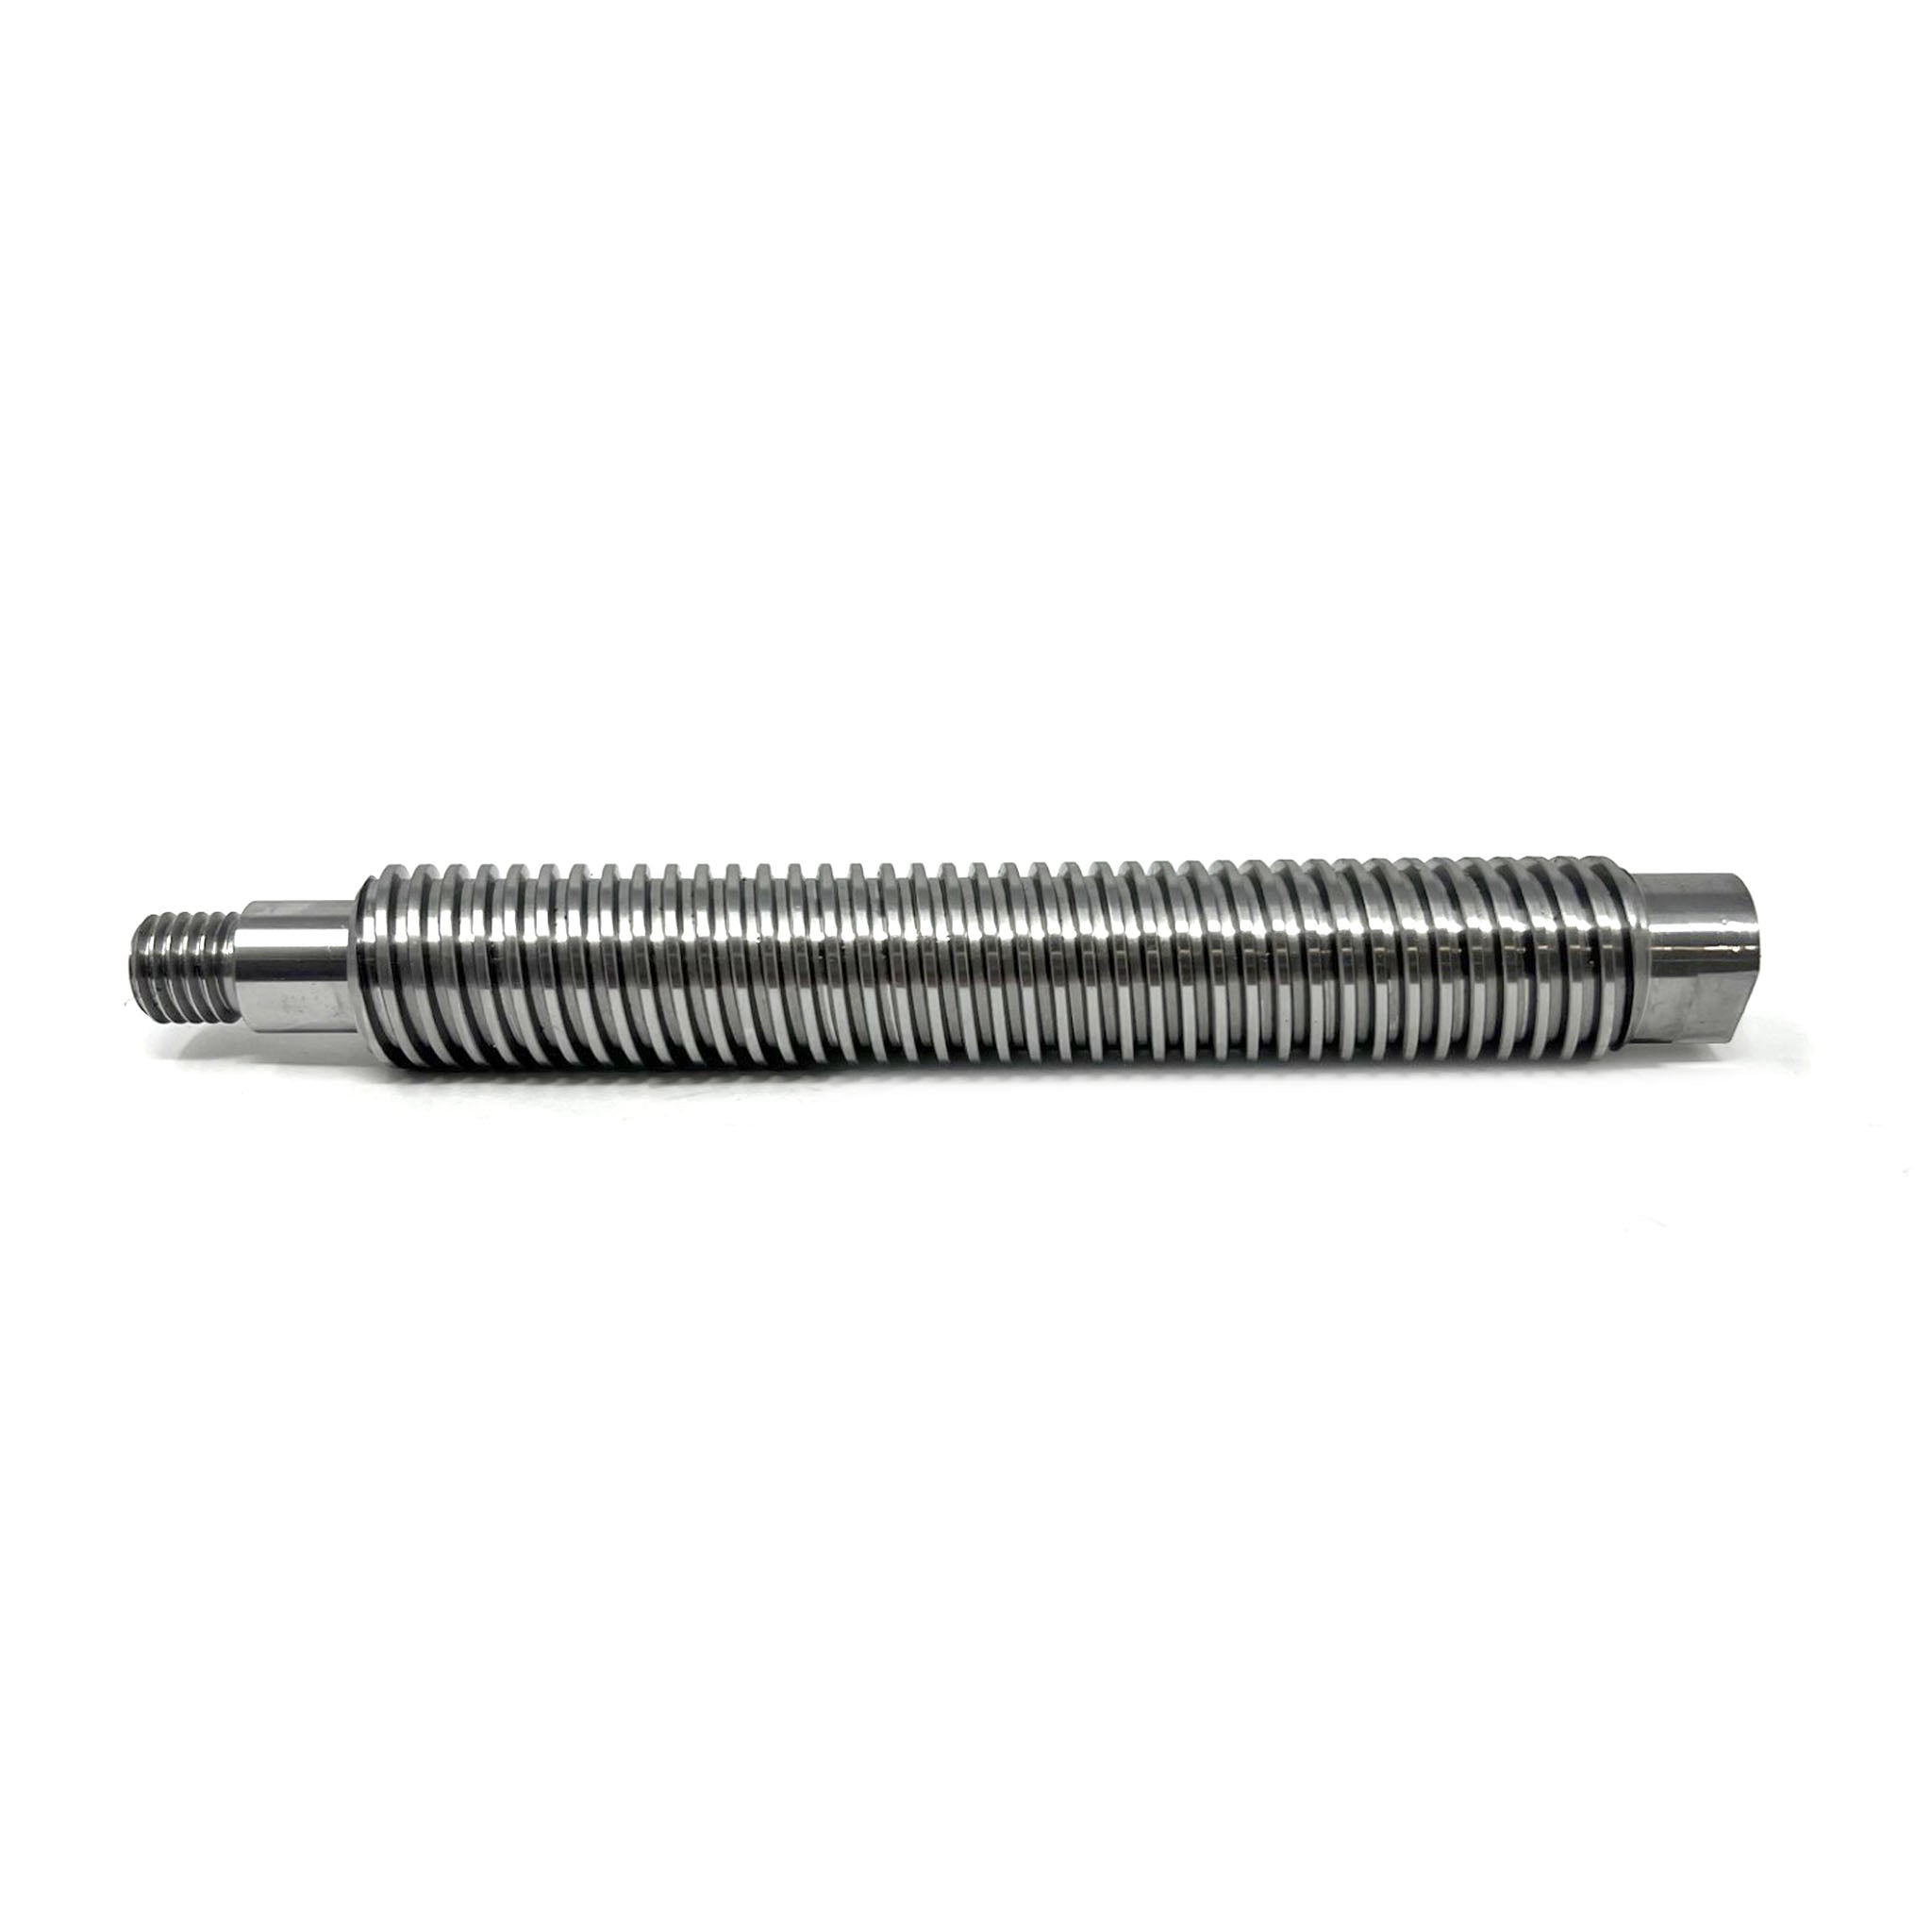 Extended Shaft, 7" Threads - 28mm x 8mm - For Accu-Turn + Coats